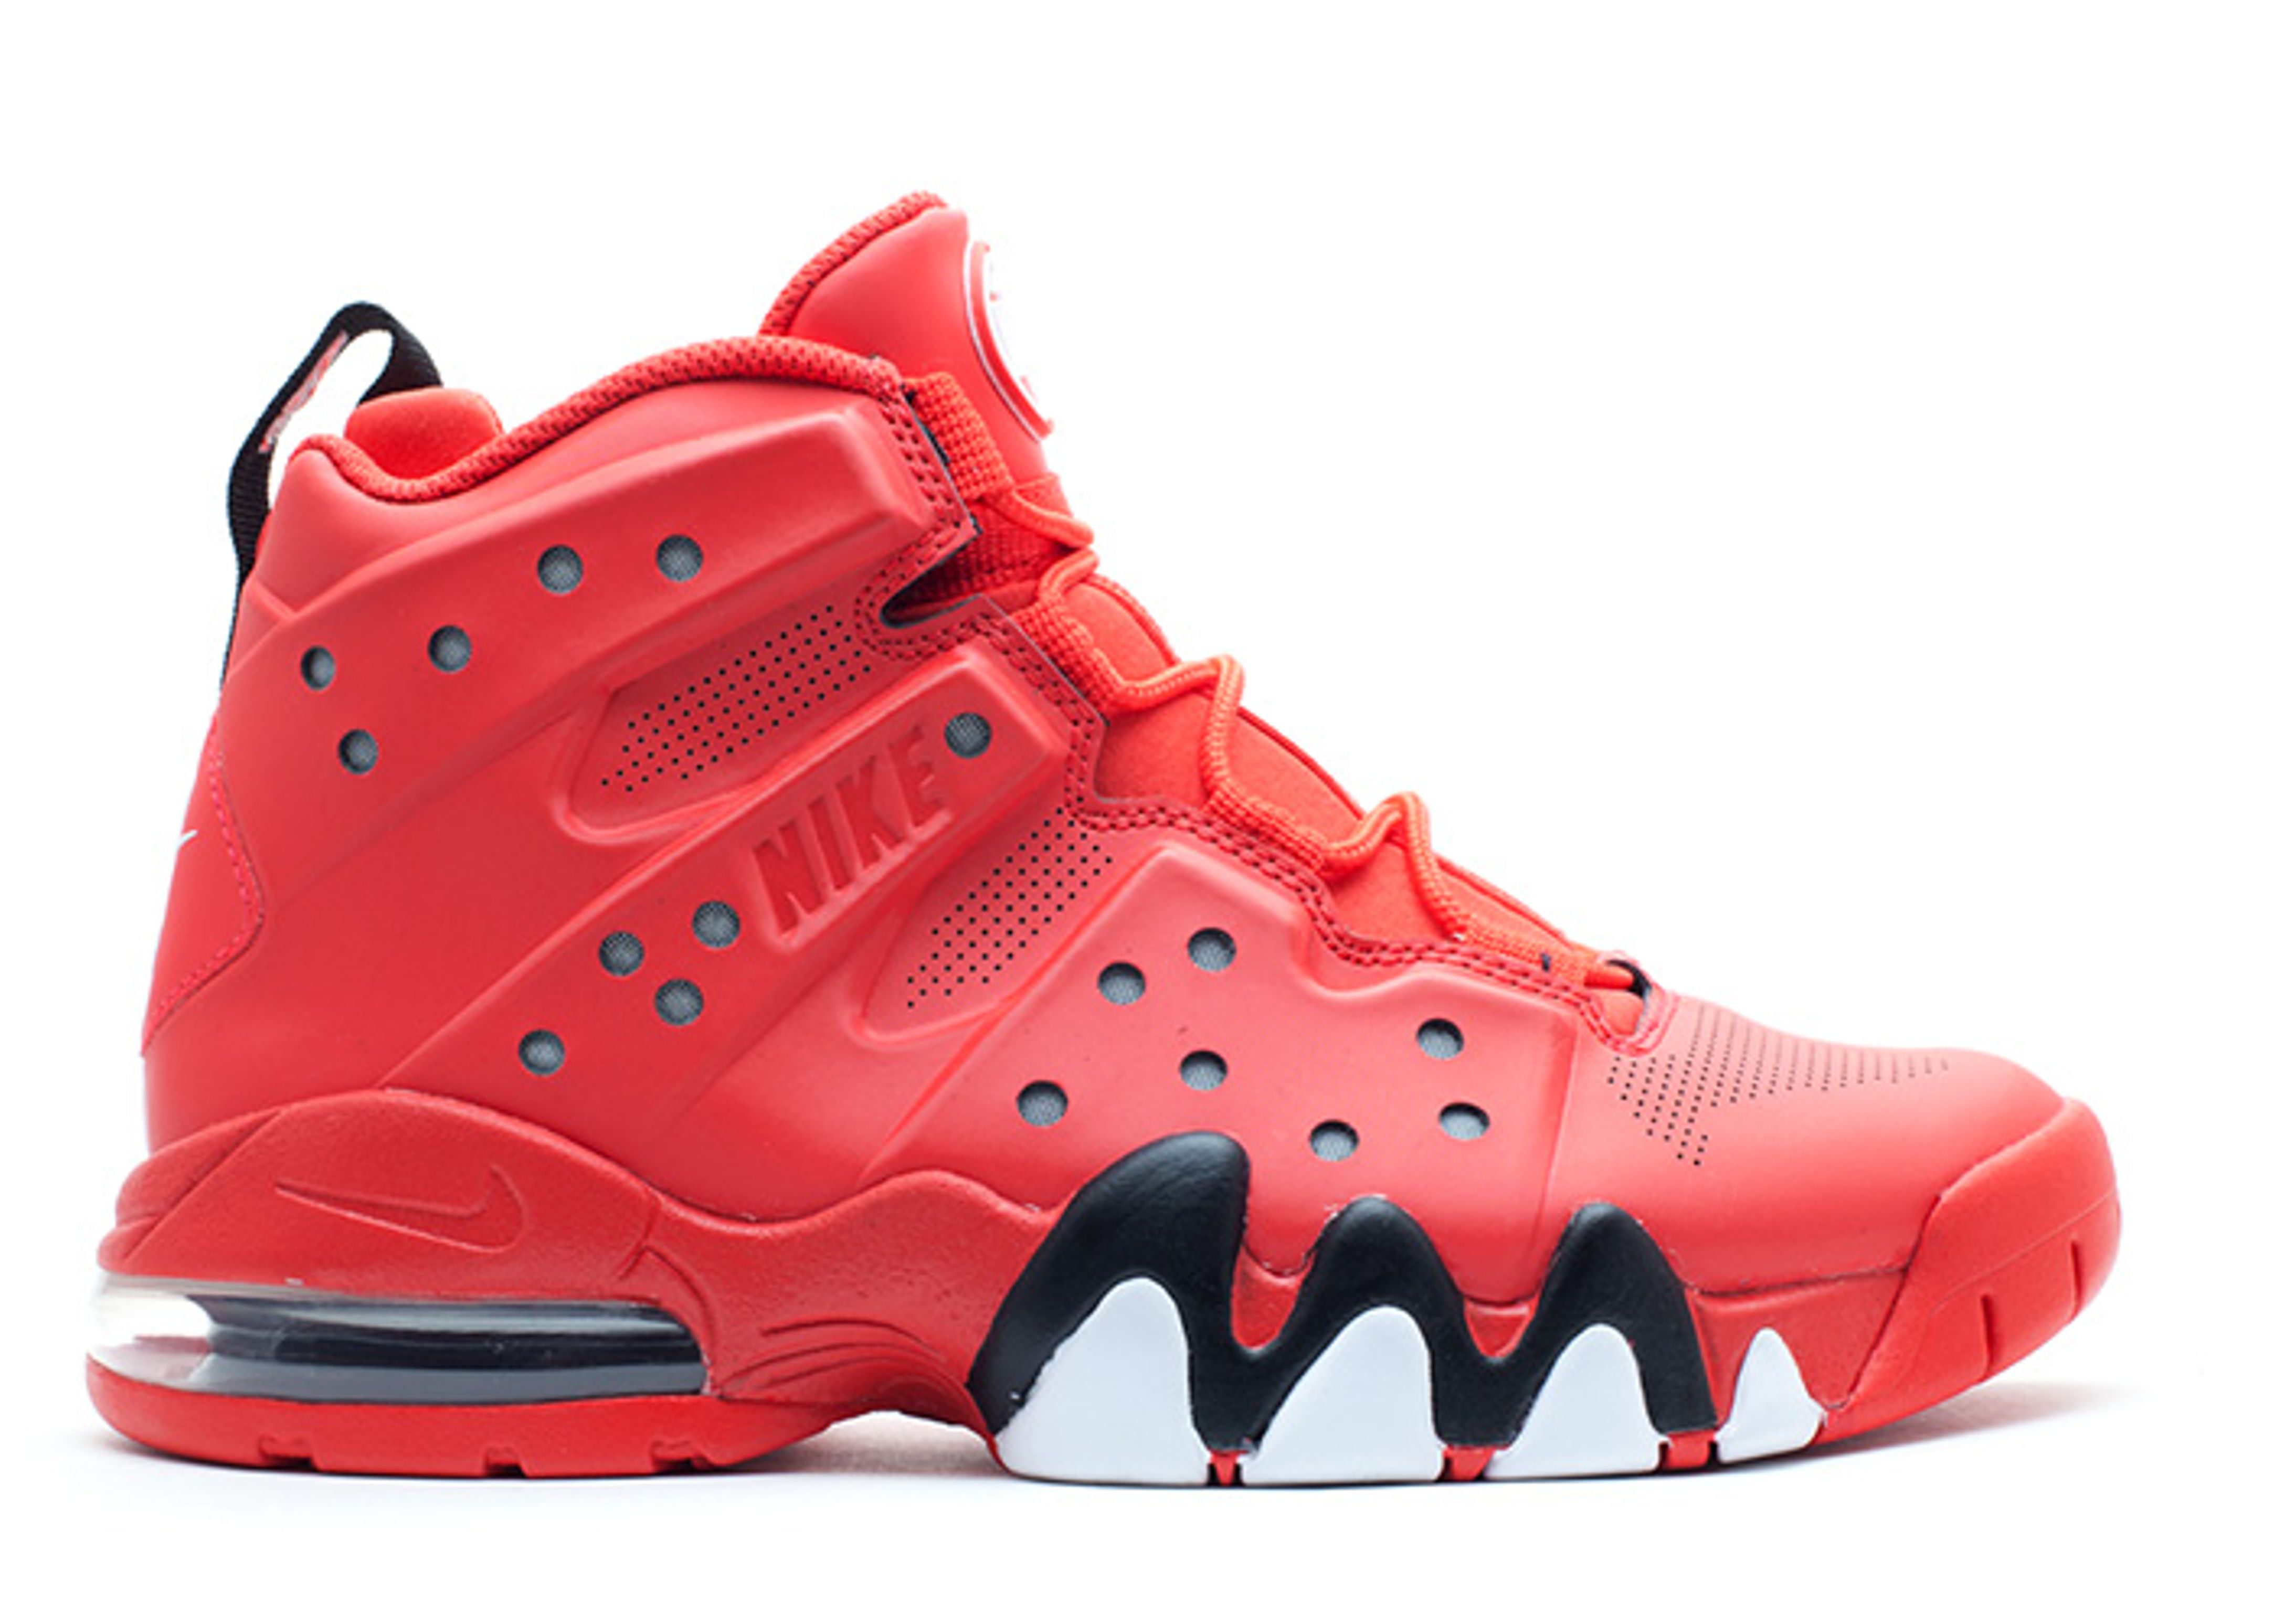 Air Max Barkley 'Hyperfuse' - Nike - 488119 601 - action red/black-white |  Flight Club